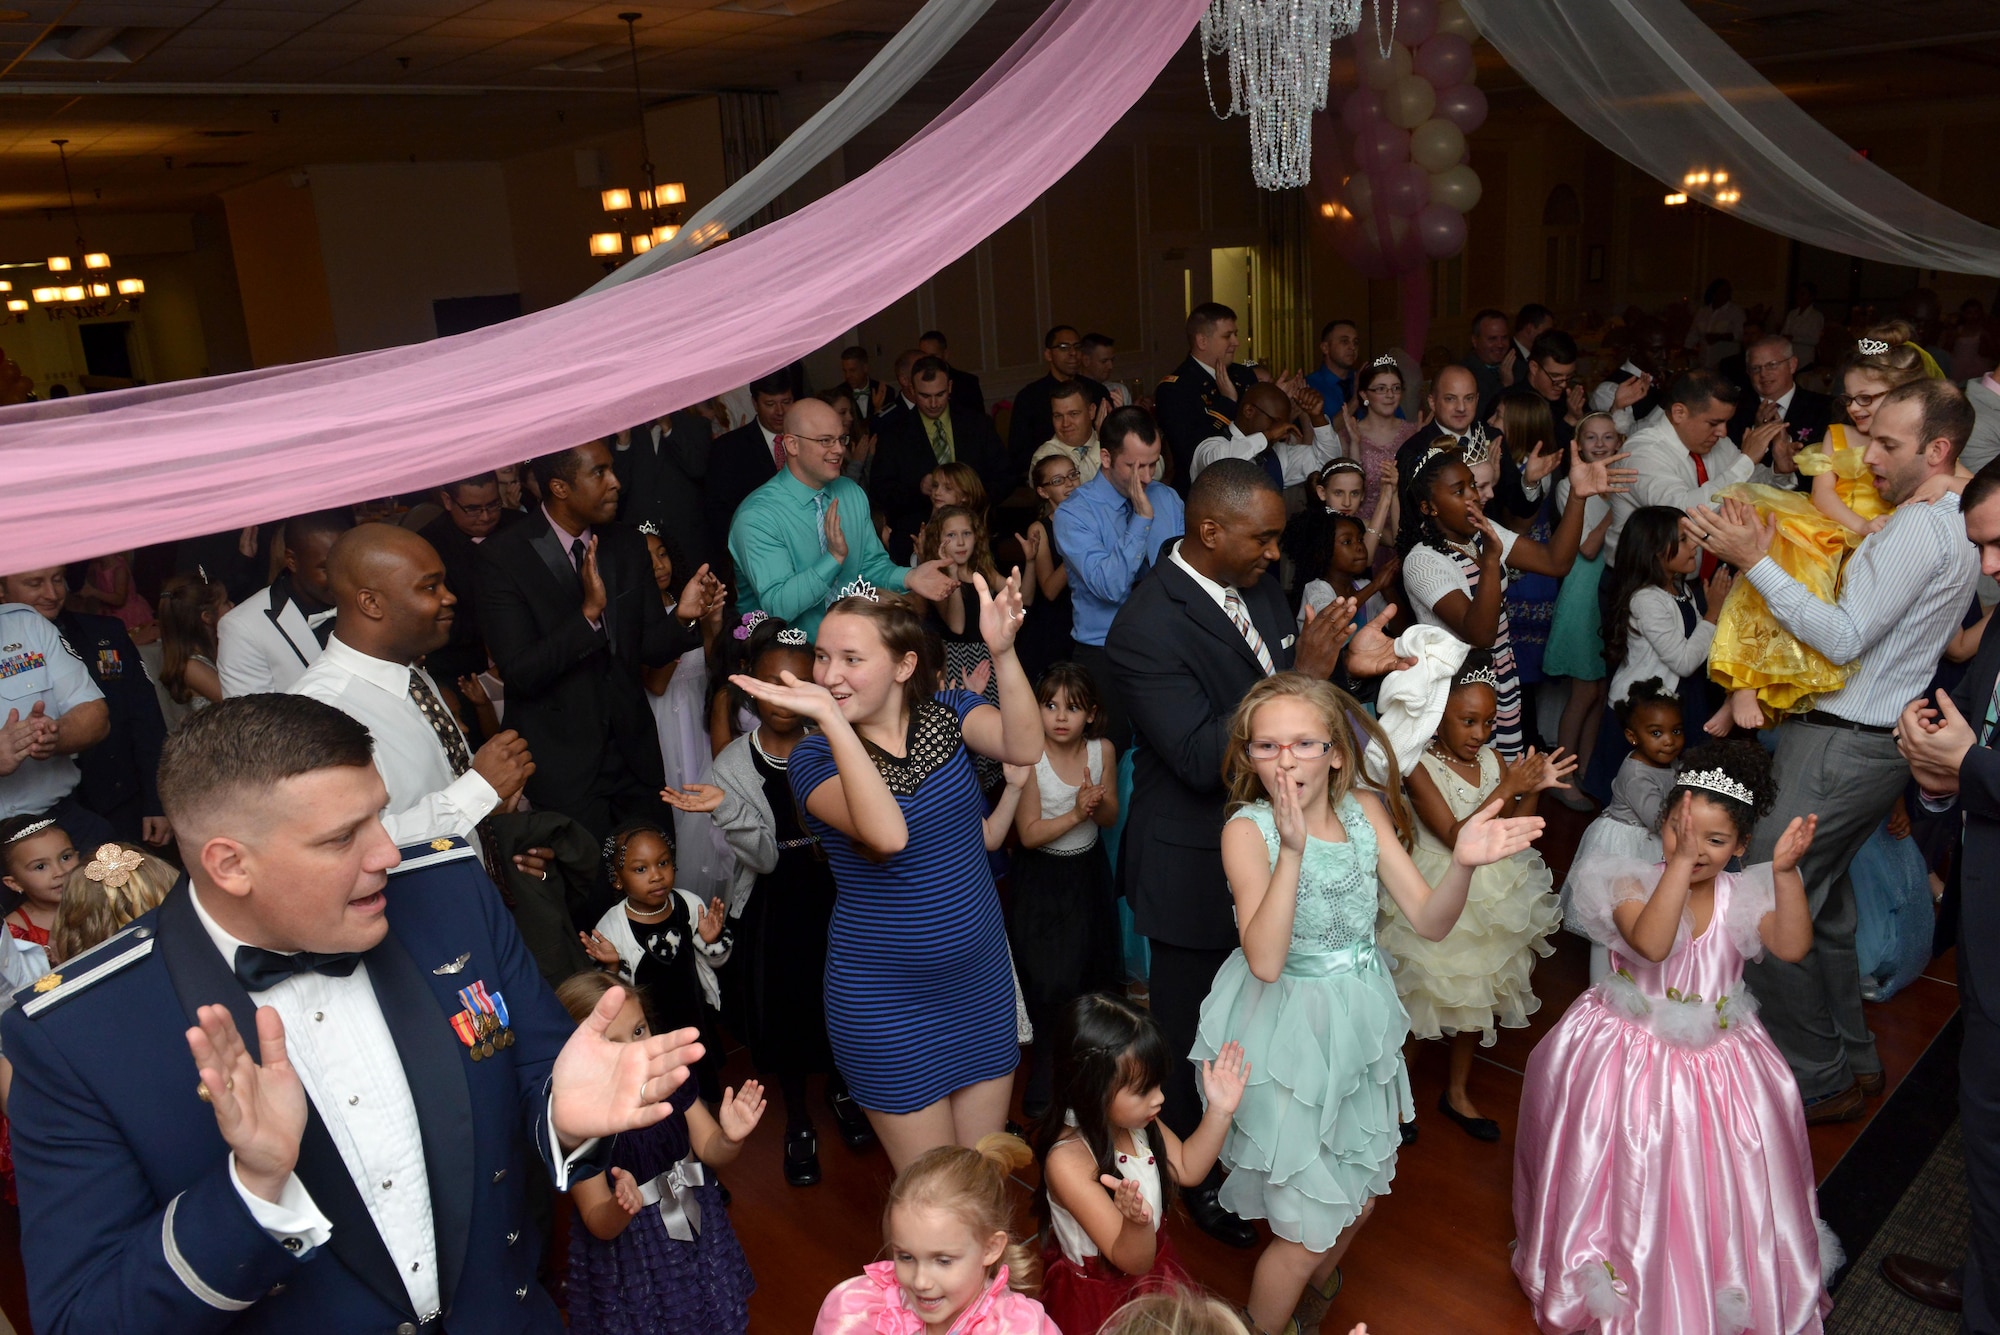 Team Shaw members clap their hands while dancing during a “Royal Affair” father-daughter princess ball at Shaw Air Force Base, S.C., Feb. 18, 2017. More than 100 couples signed up for the dance, which included entertainment, dinner and activities such as musical chairs. (U.S. Air Force photo by Airman 1st Class Destinee Sweeney)